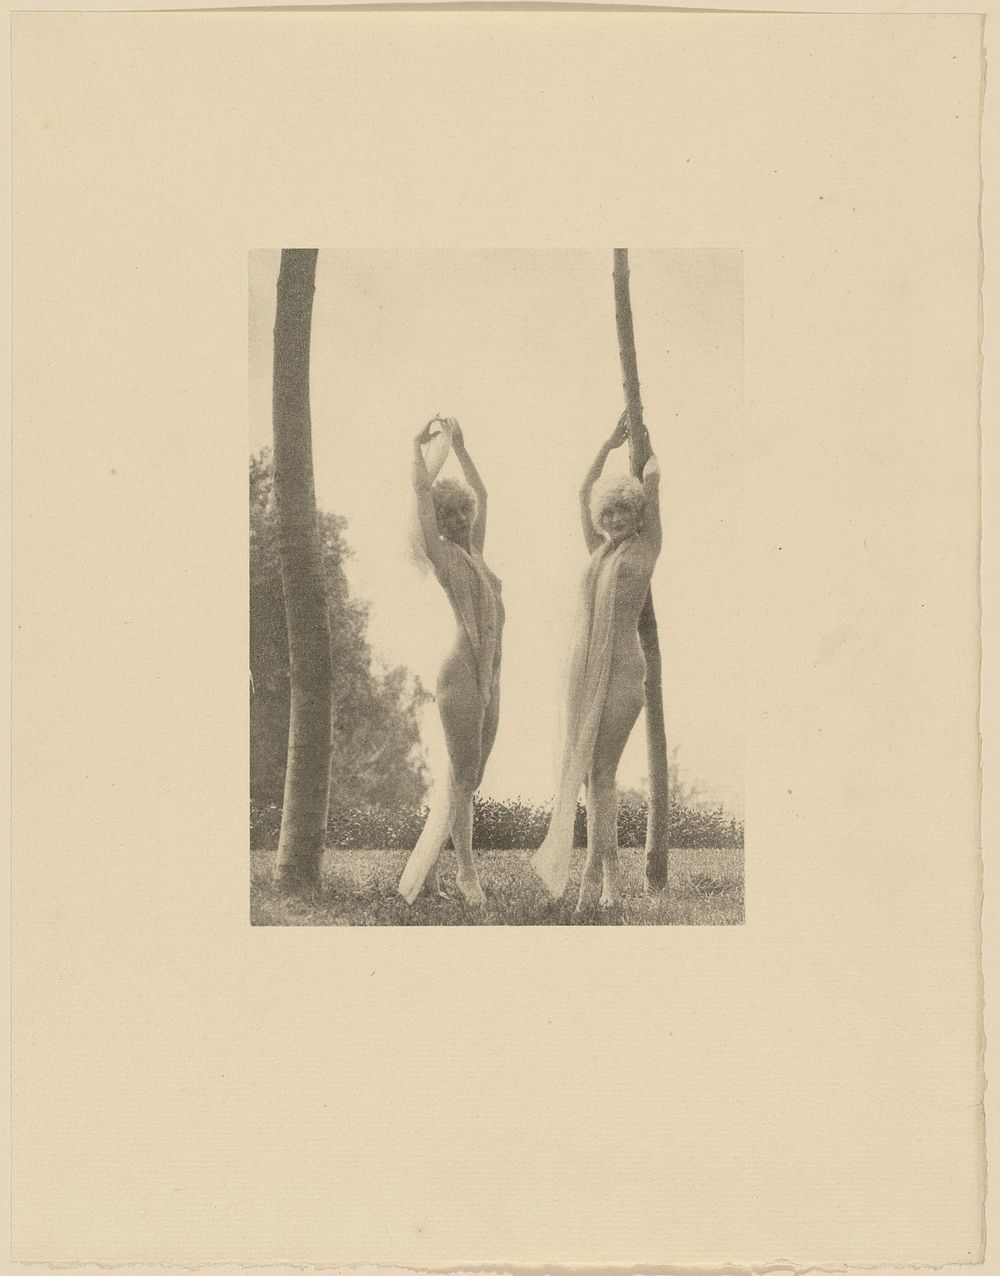 Two Partially Nude Females in Blond Wigs Stretching Outdoors by Arthur F Kales